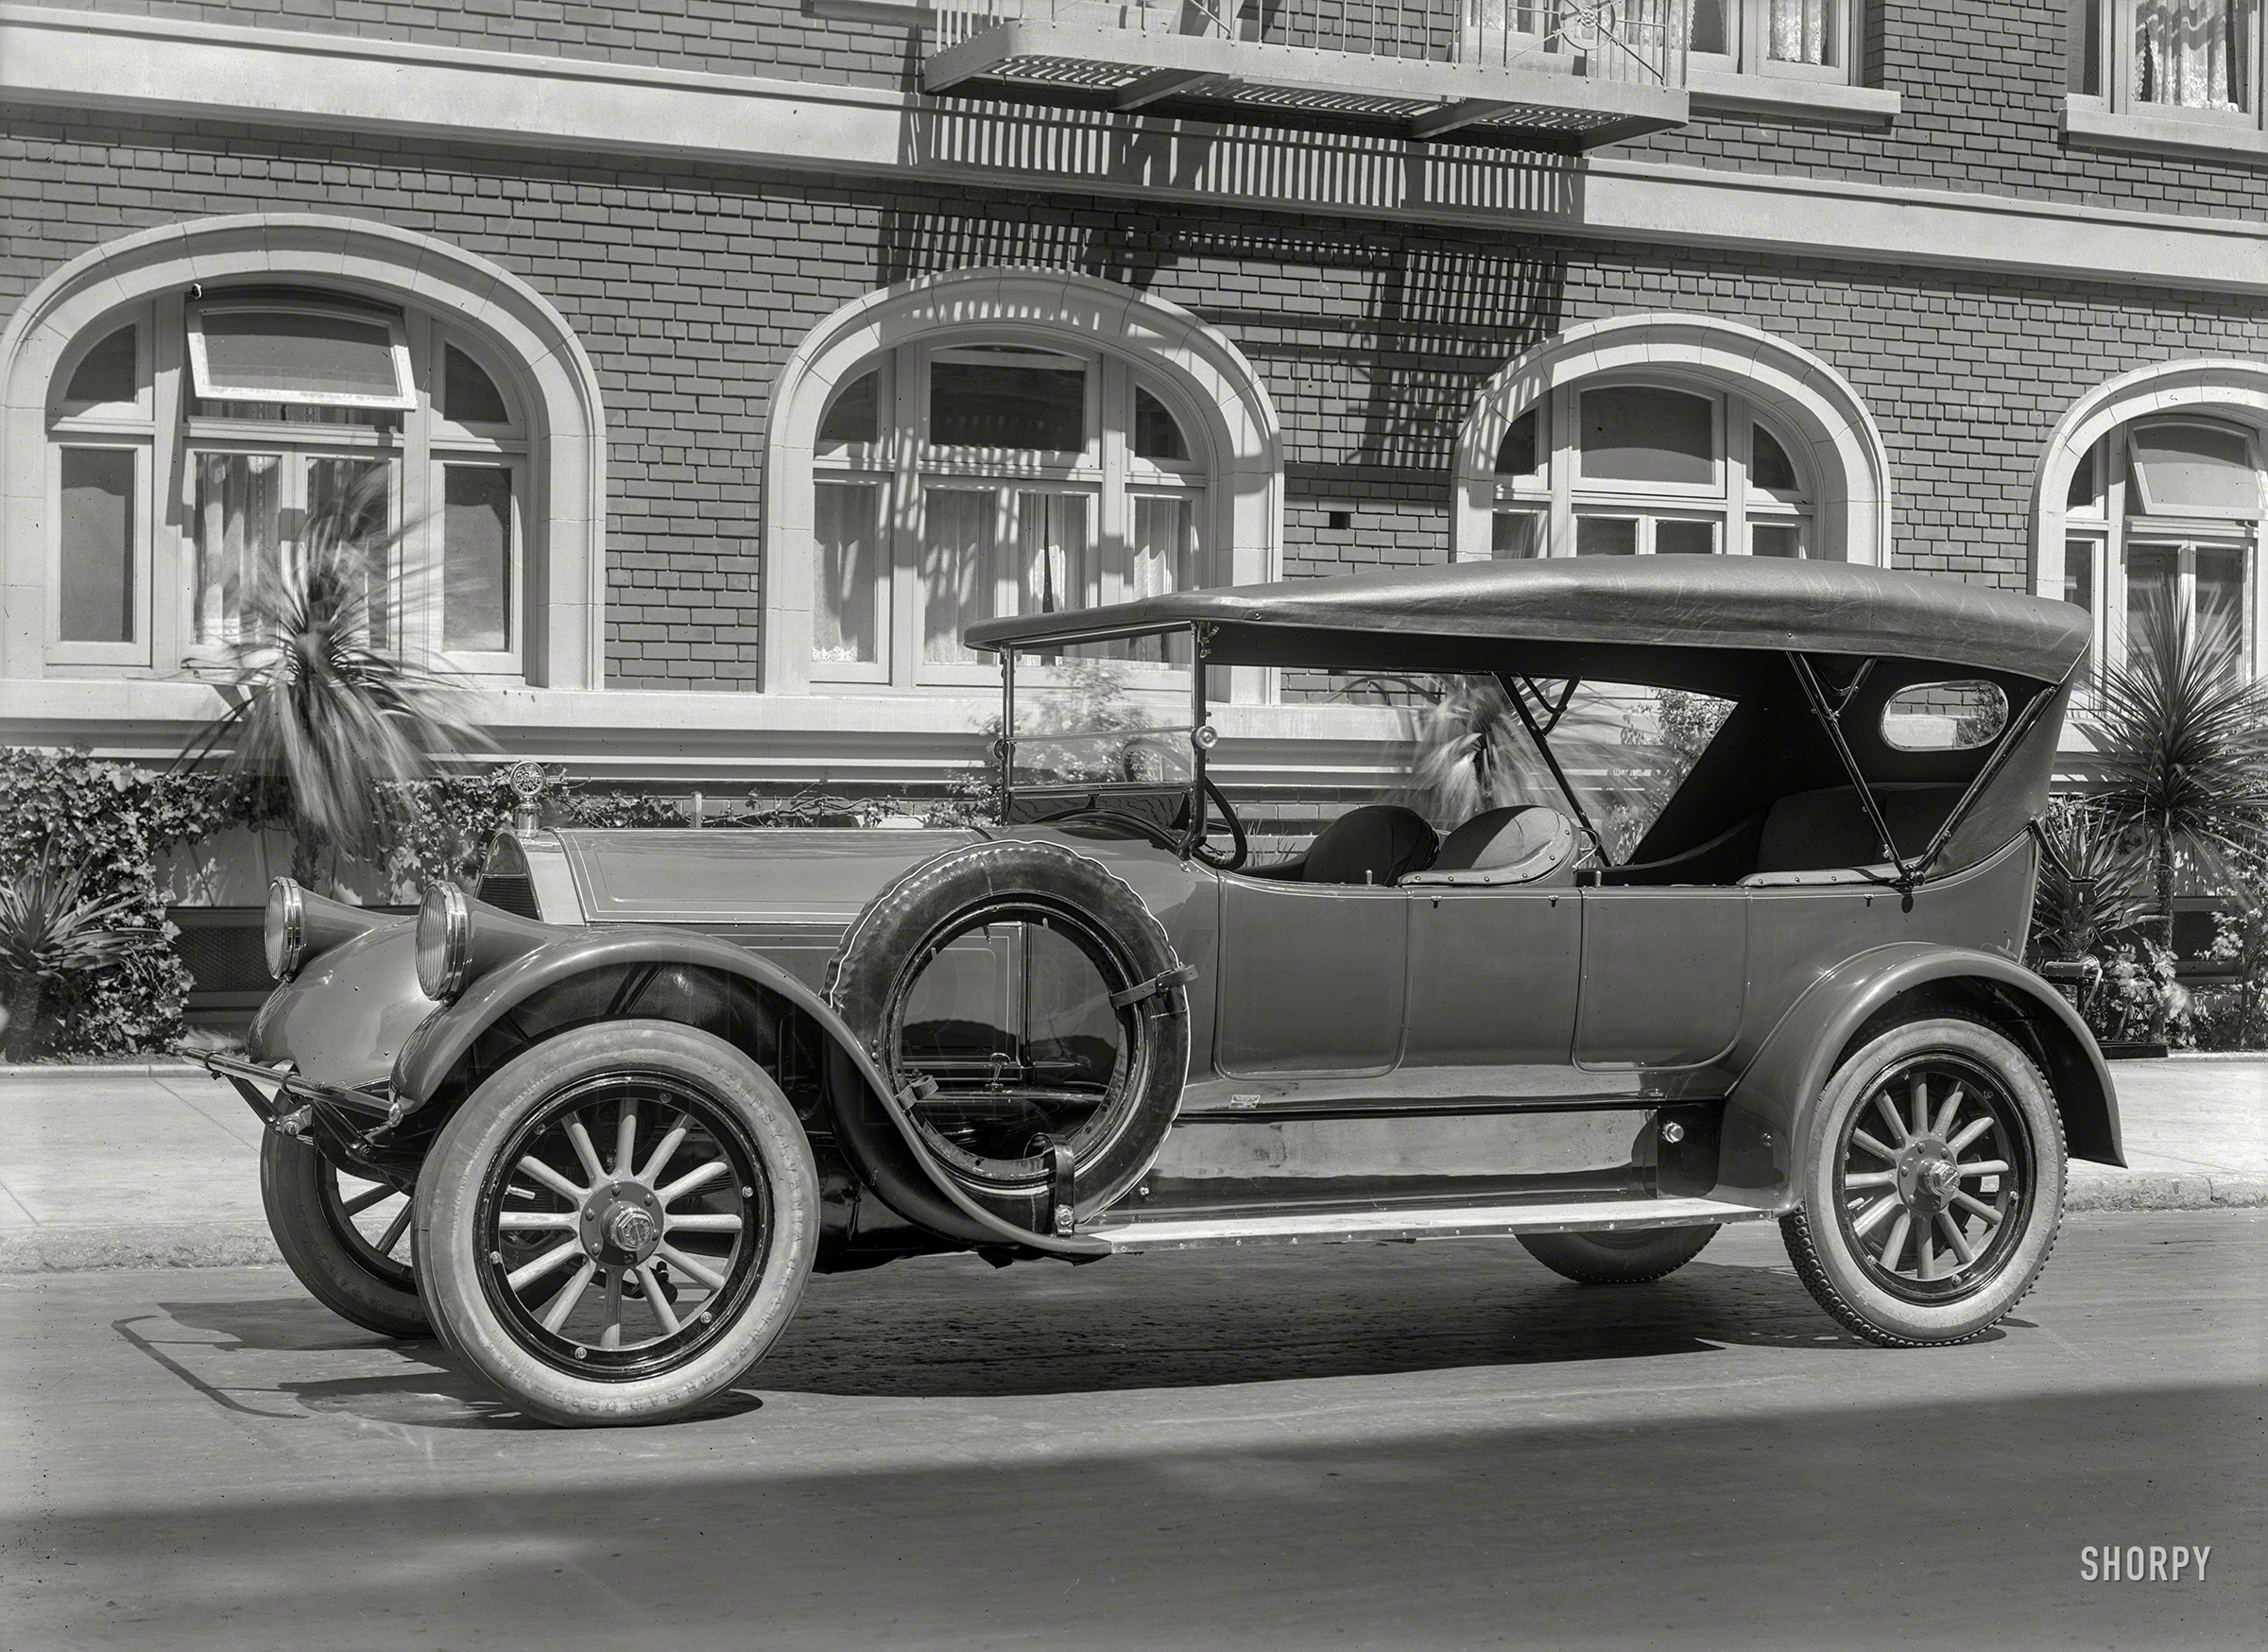 San Francisco circa 1920. "Pierce-Arrow Model 31 touring car." Latest chapter in the Shorpy Anthology of Antique Autos. 5x7 glass negative. View full size.